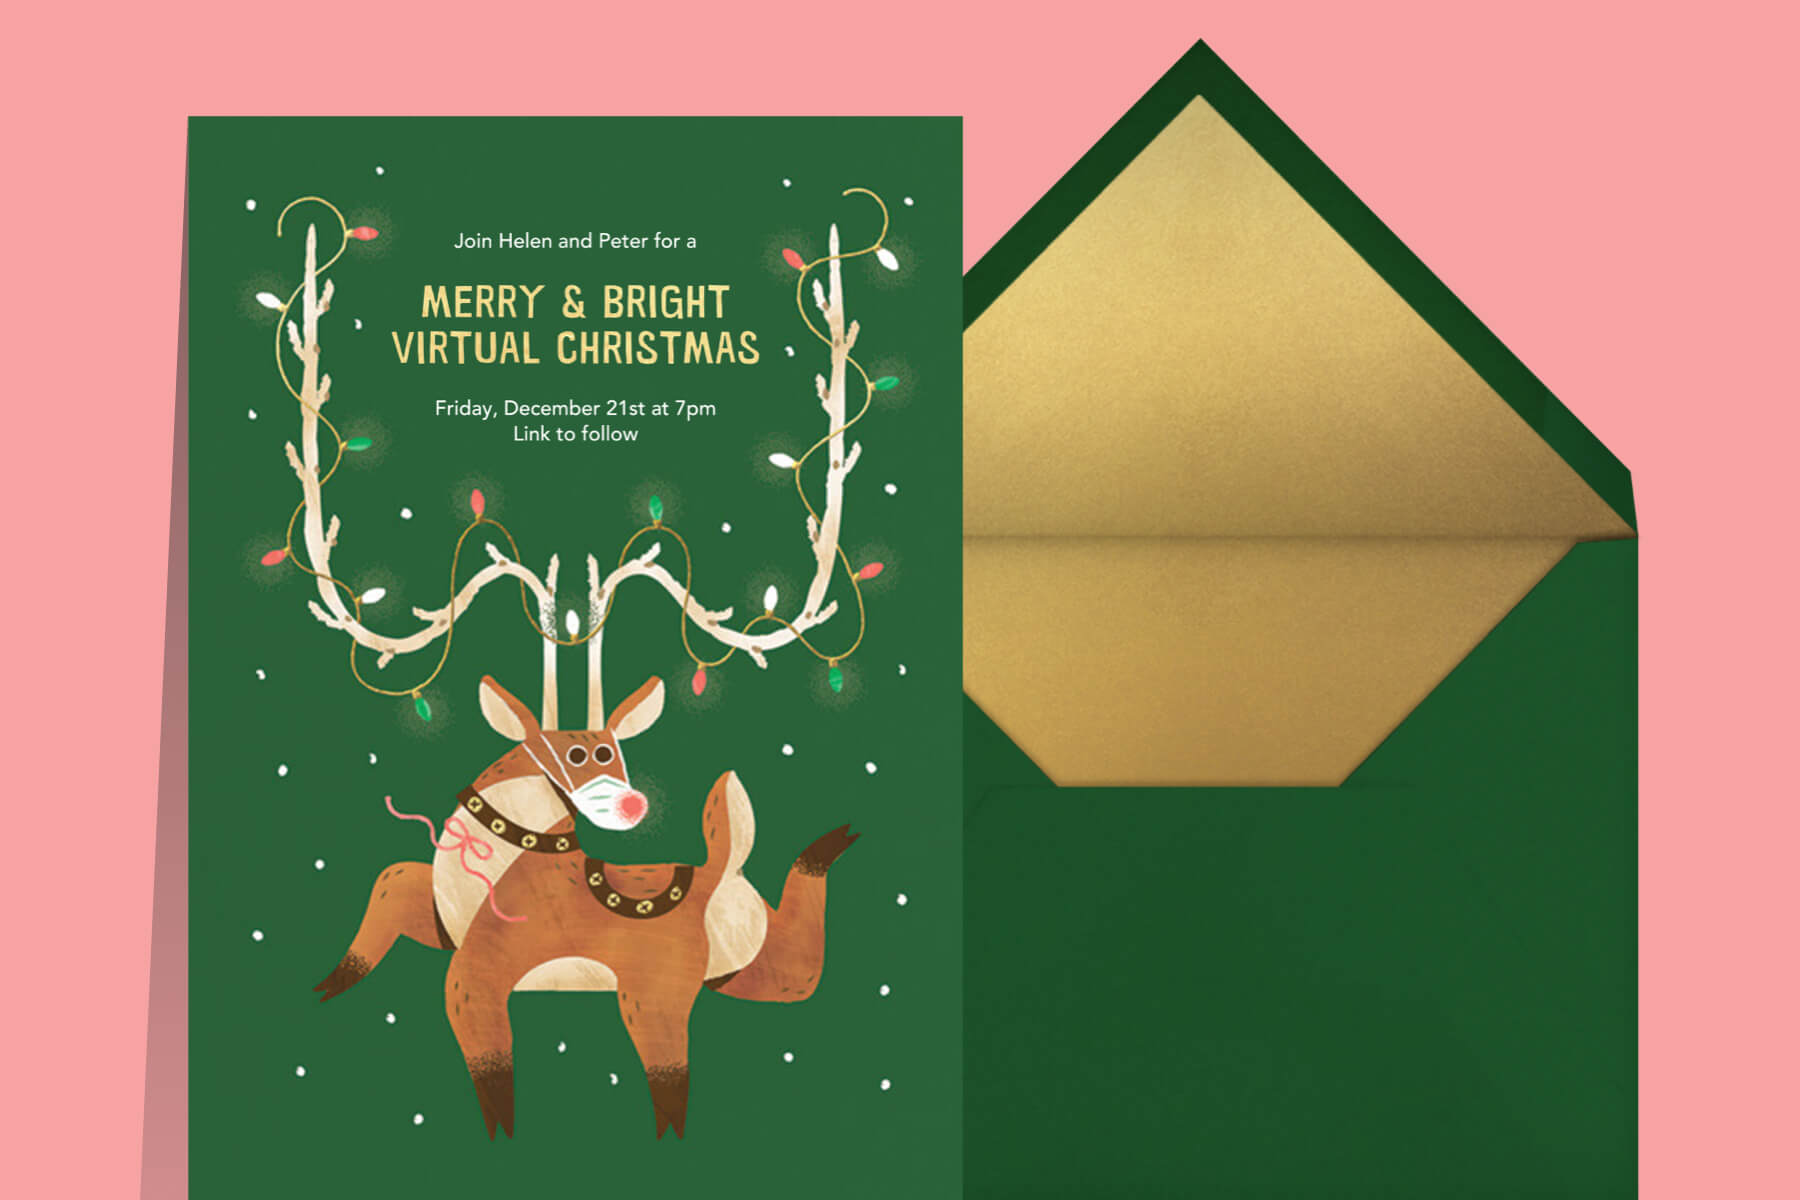 how to host a covid christmas party in 2020 featuring an invitation with a reindeer with antlers covered in Christmas lights